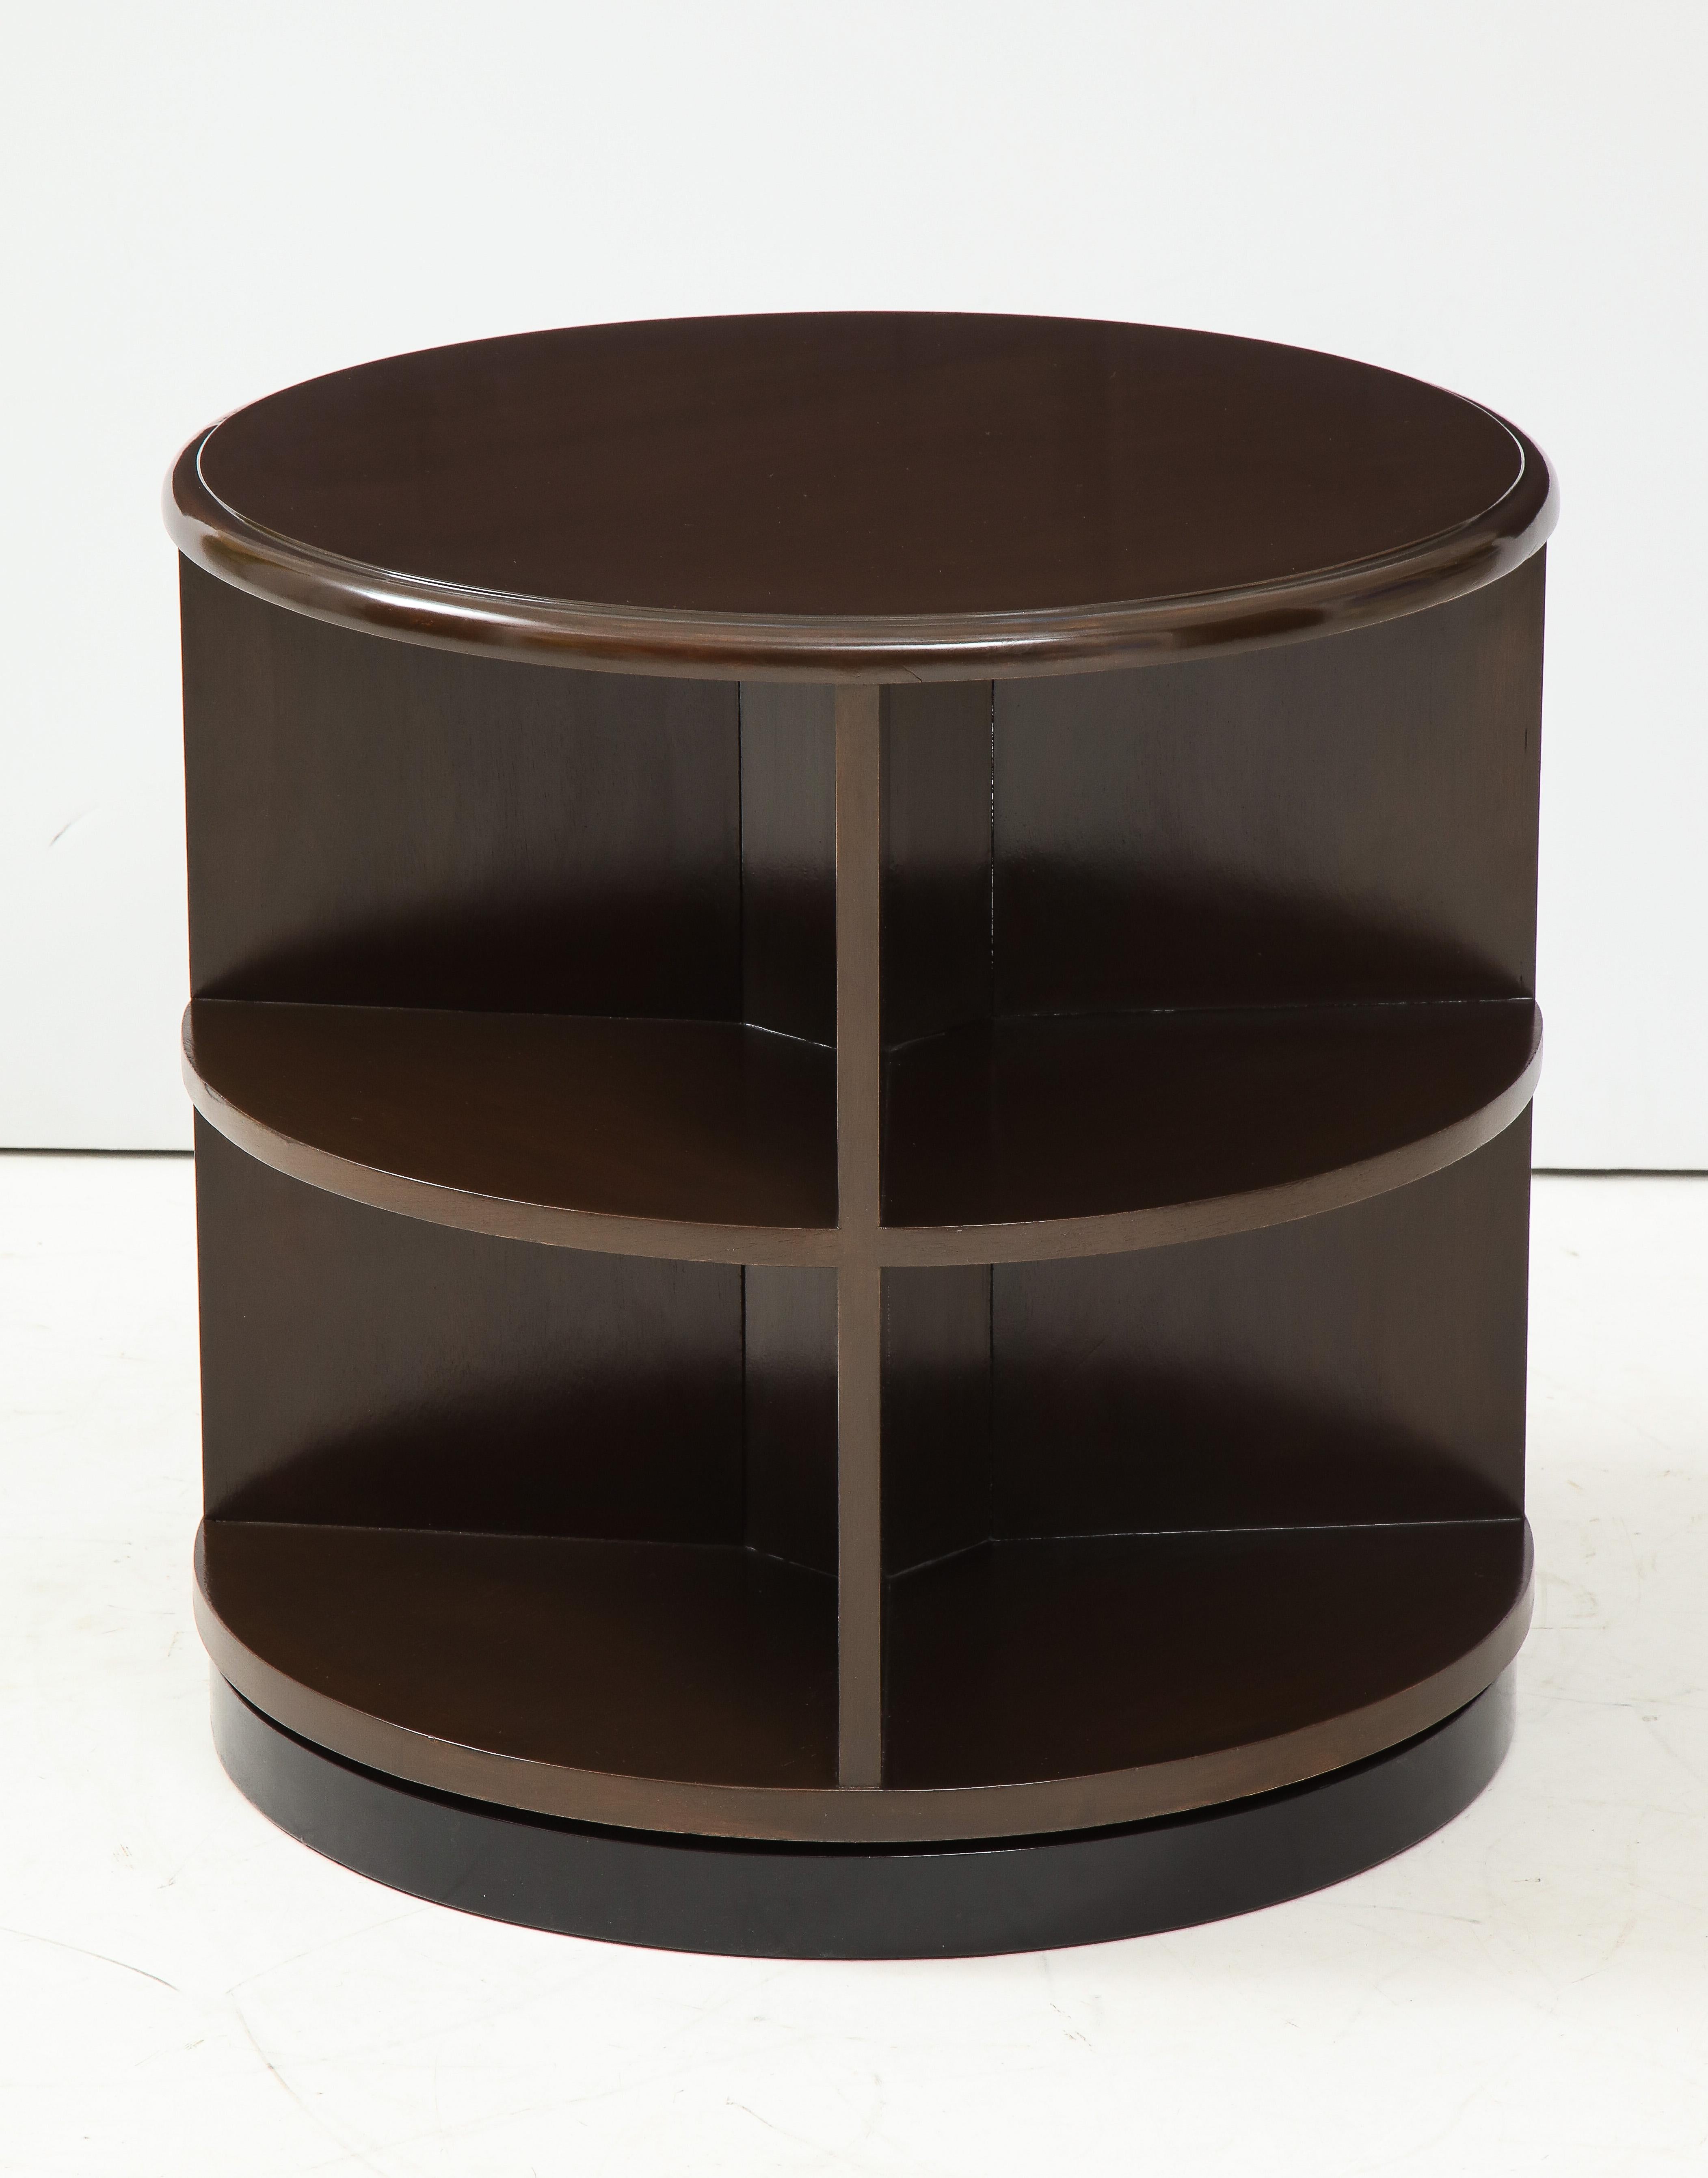 Pair of bespoke revolving Art Deco walnut side tables in a chocolate brown stain resting on black lacquer base. 8 sections in each table to house books or curiosities.